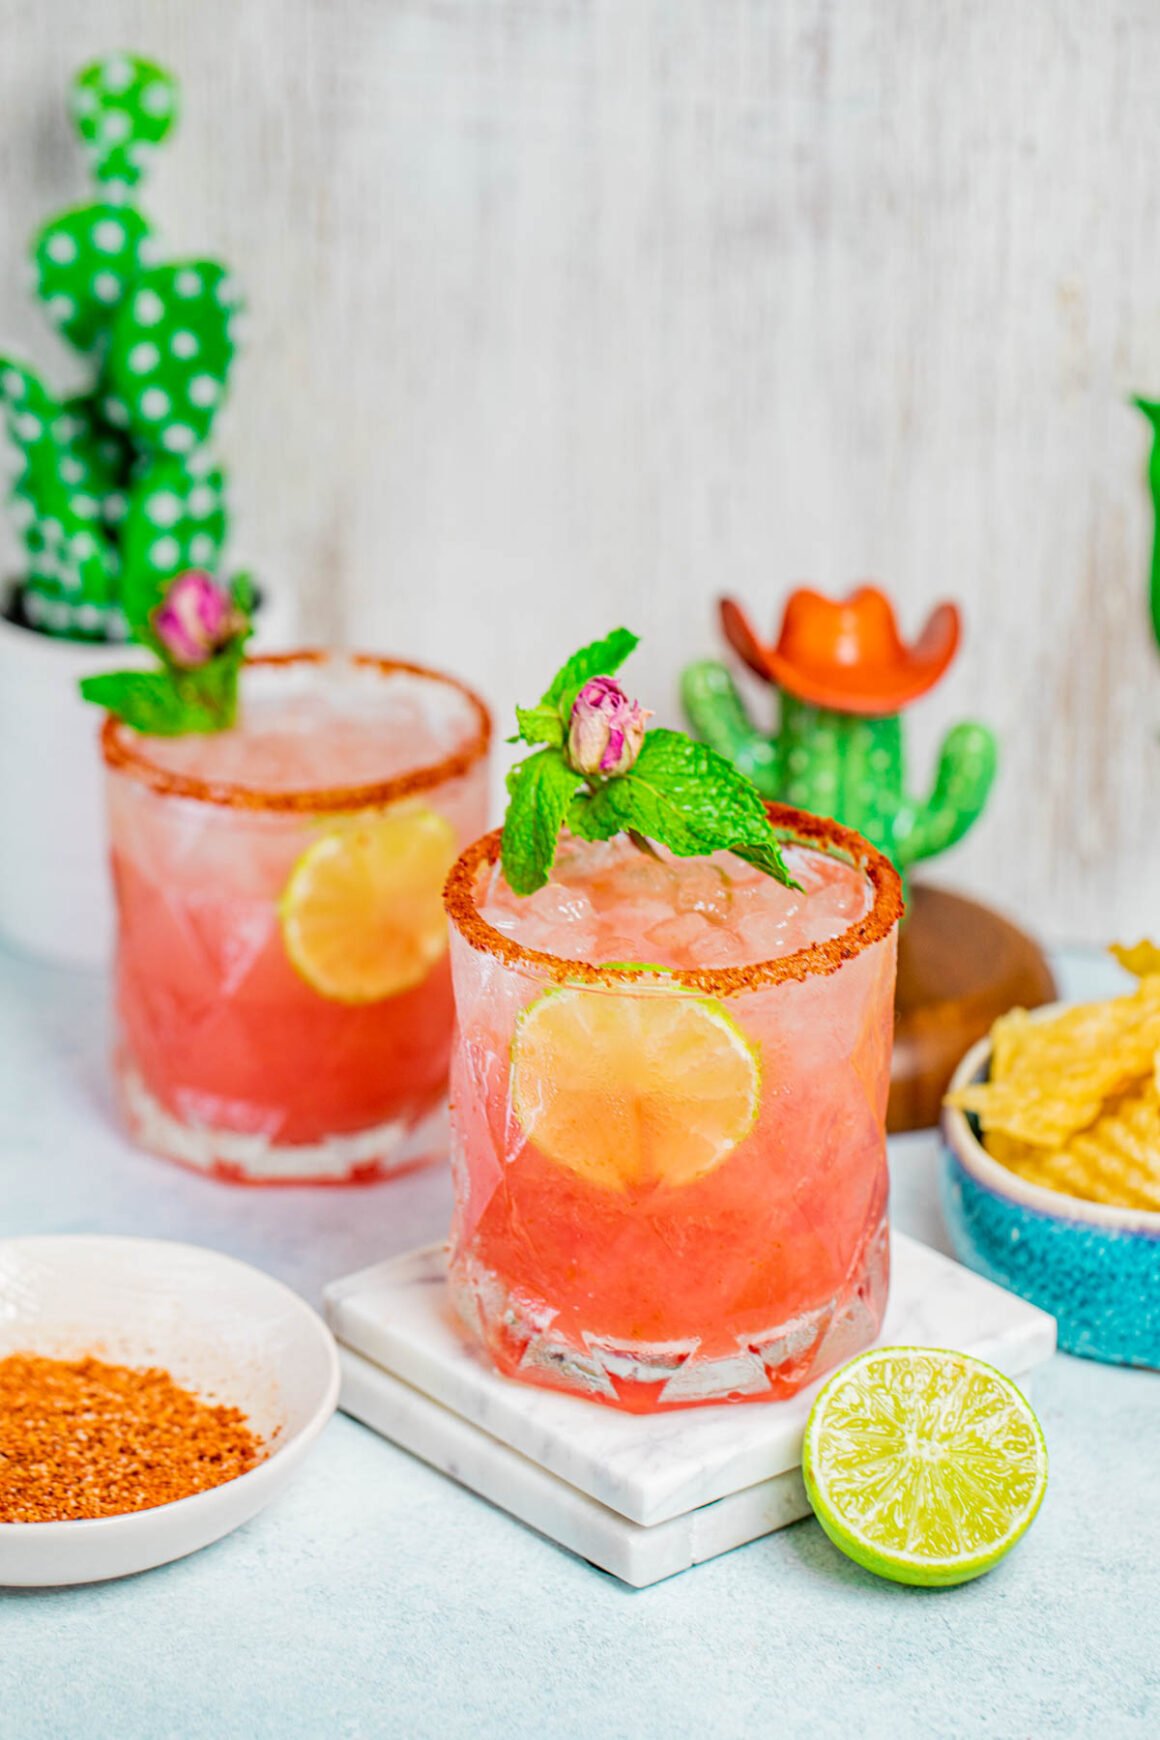 Delight your senses with a Guava Margarita, an extraordinary concoction that combines the exotic flavors of guava with the classic charm of a margarita.